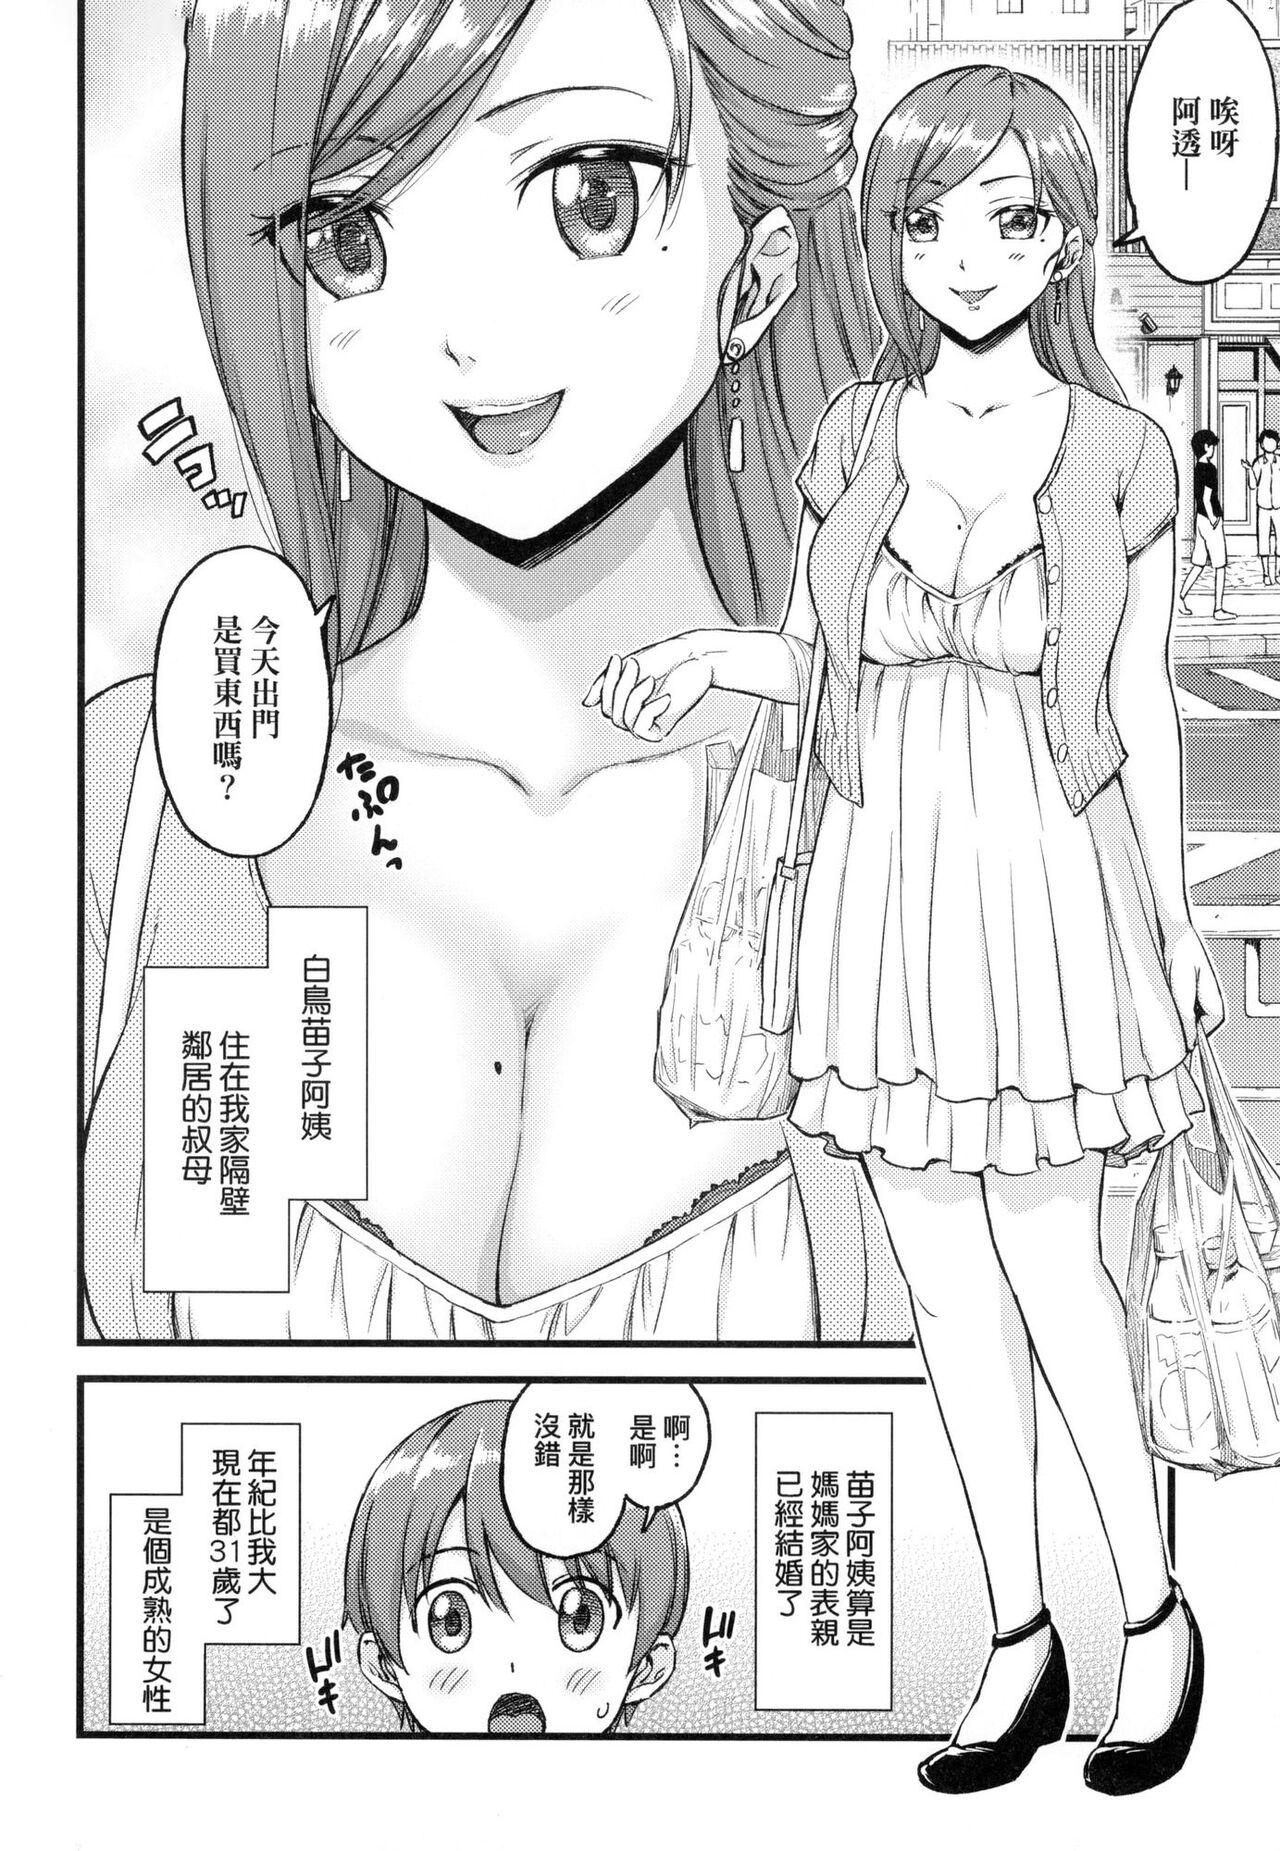 Ejaculation Oppai na Natsuyasumi - Summer Vacation With Oppai | 乳香四溢的暑假 Cumload - Page 10